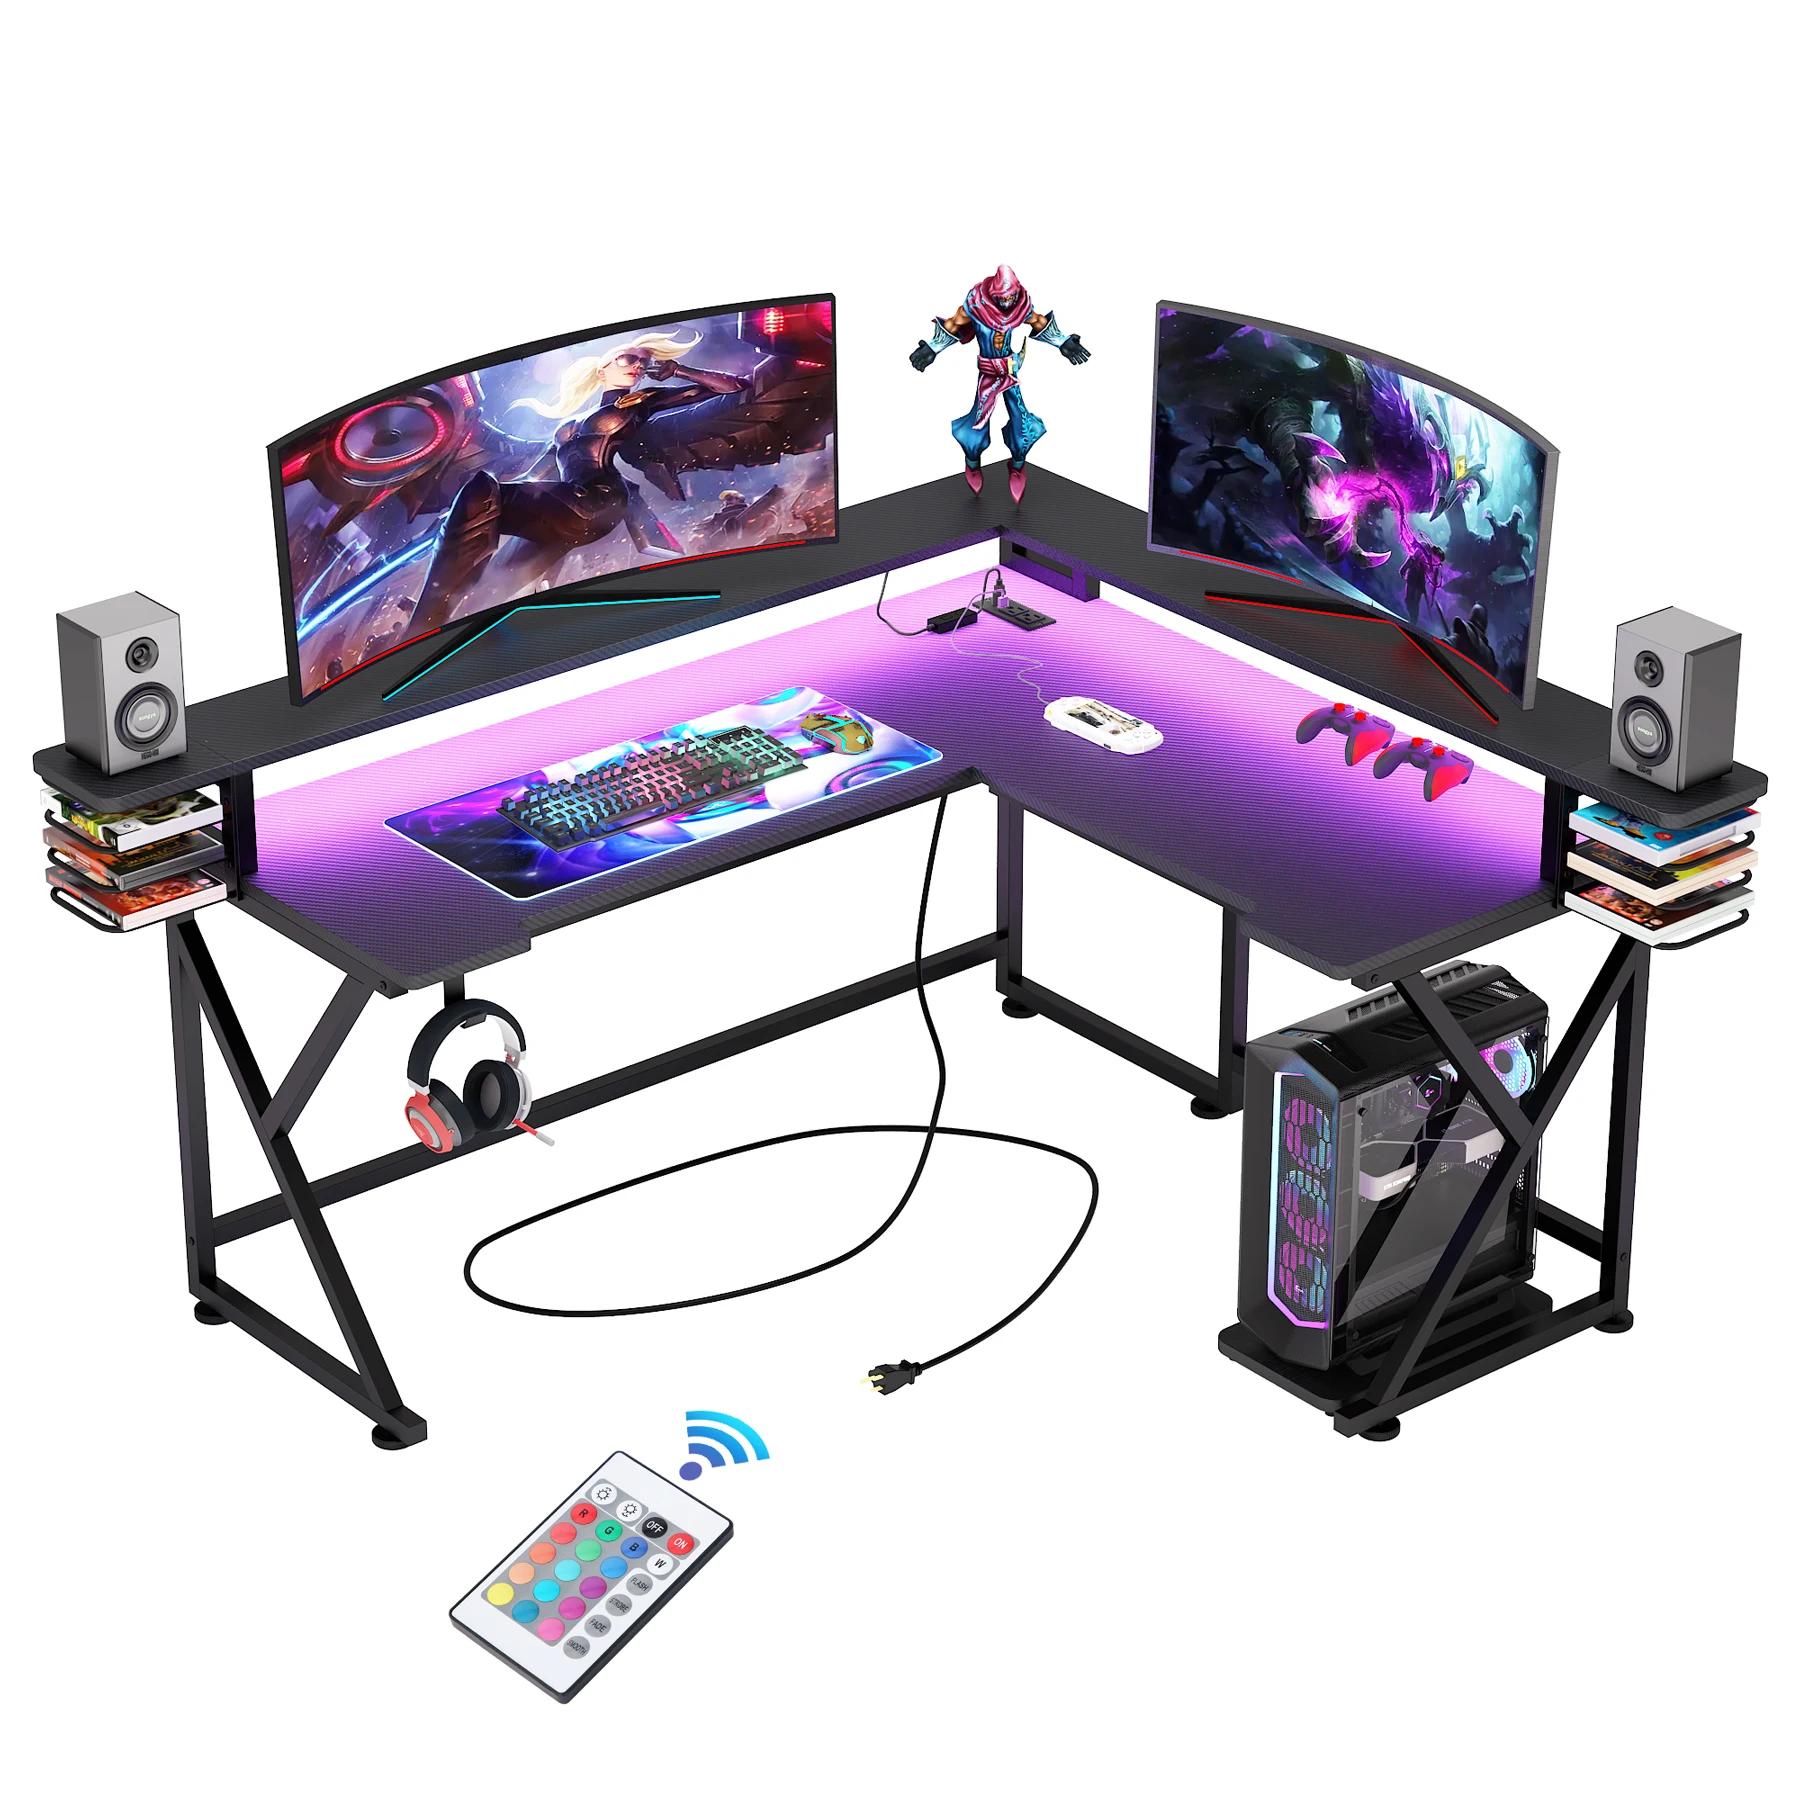 Tribesigns Ergonomic Black 61 inch Computer Corner Gaming Desk L Shaped with USB Port Hook Led Light Power Outlet Monitor Stand